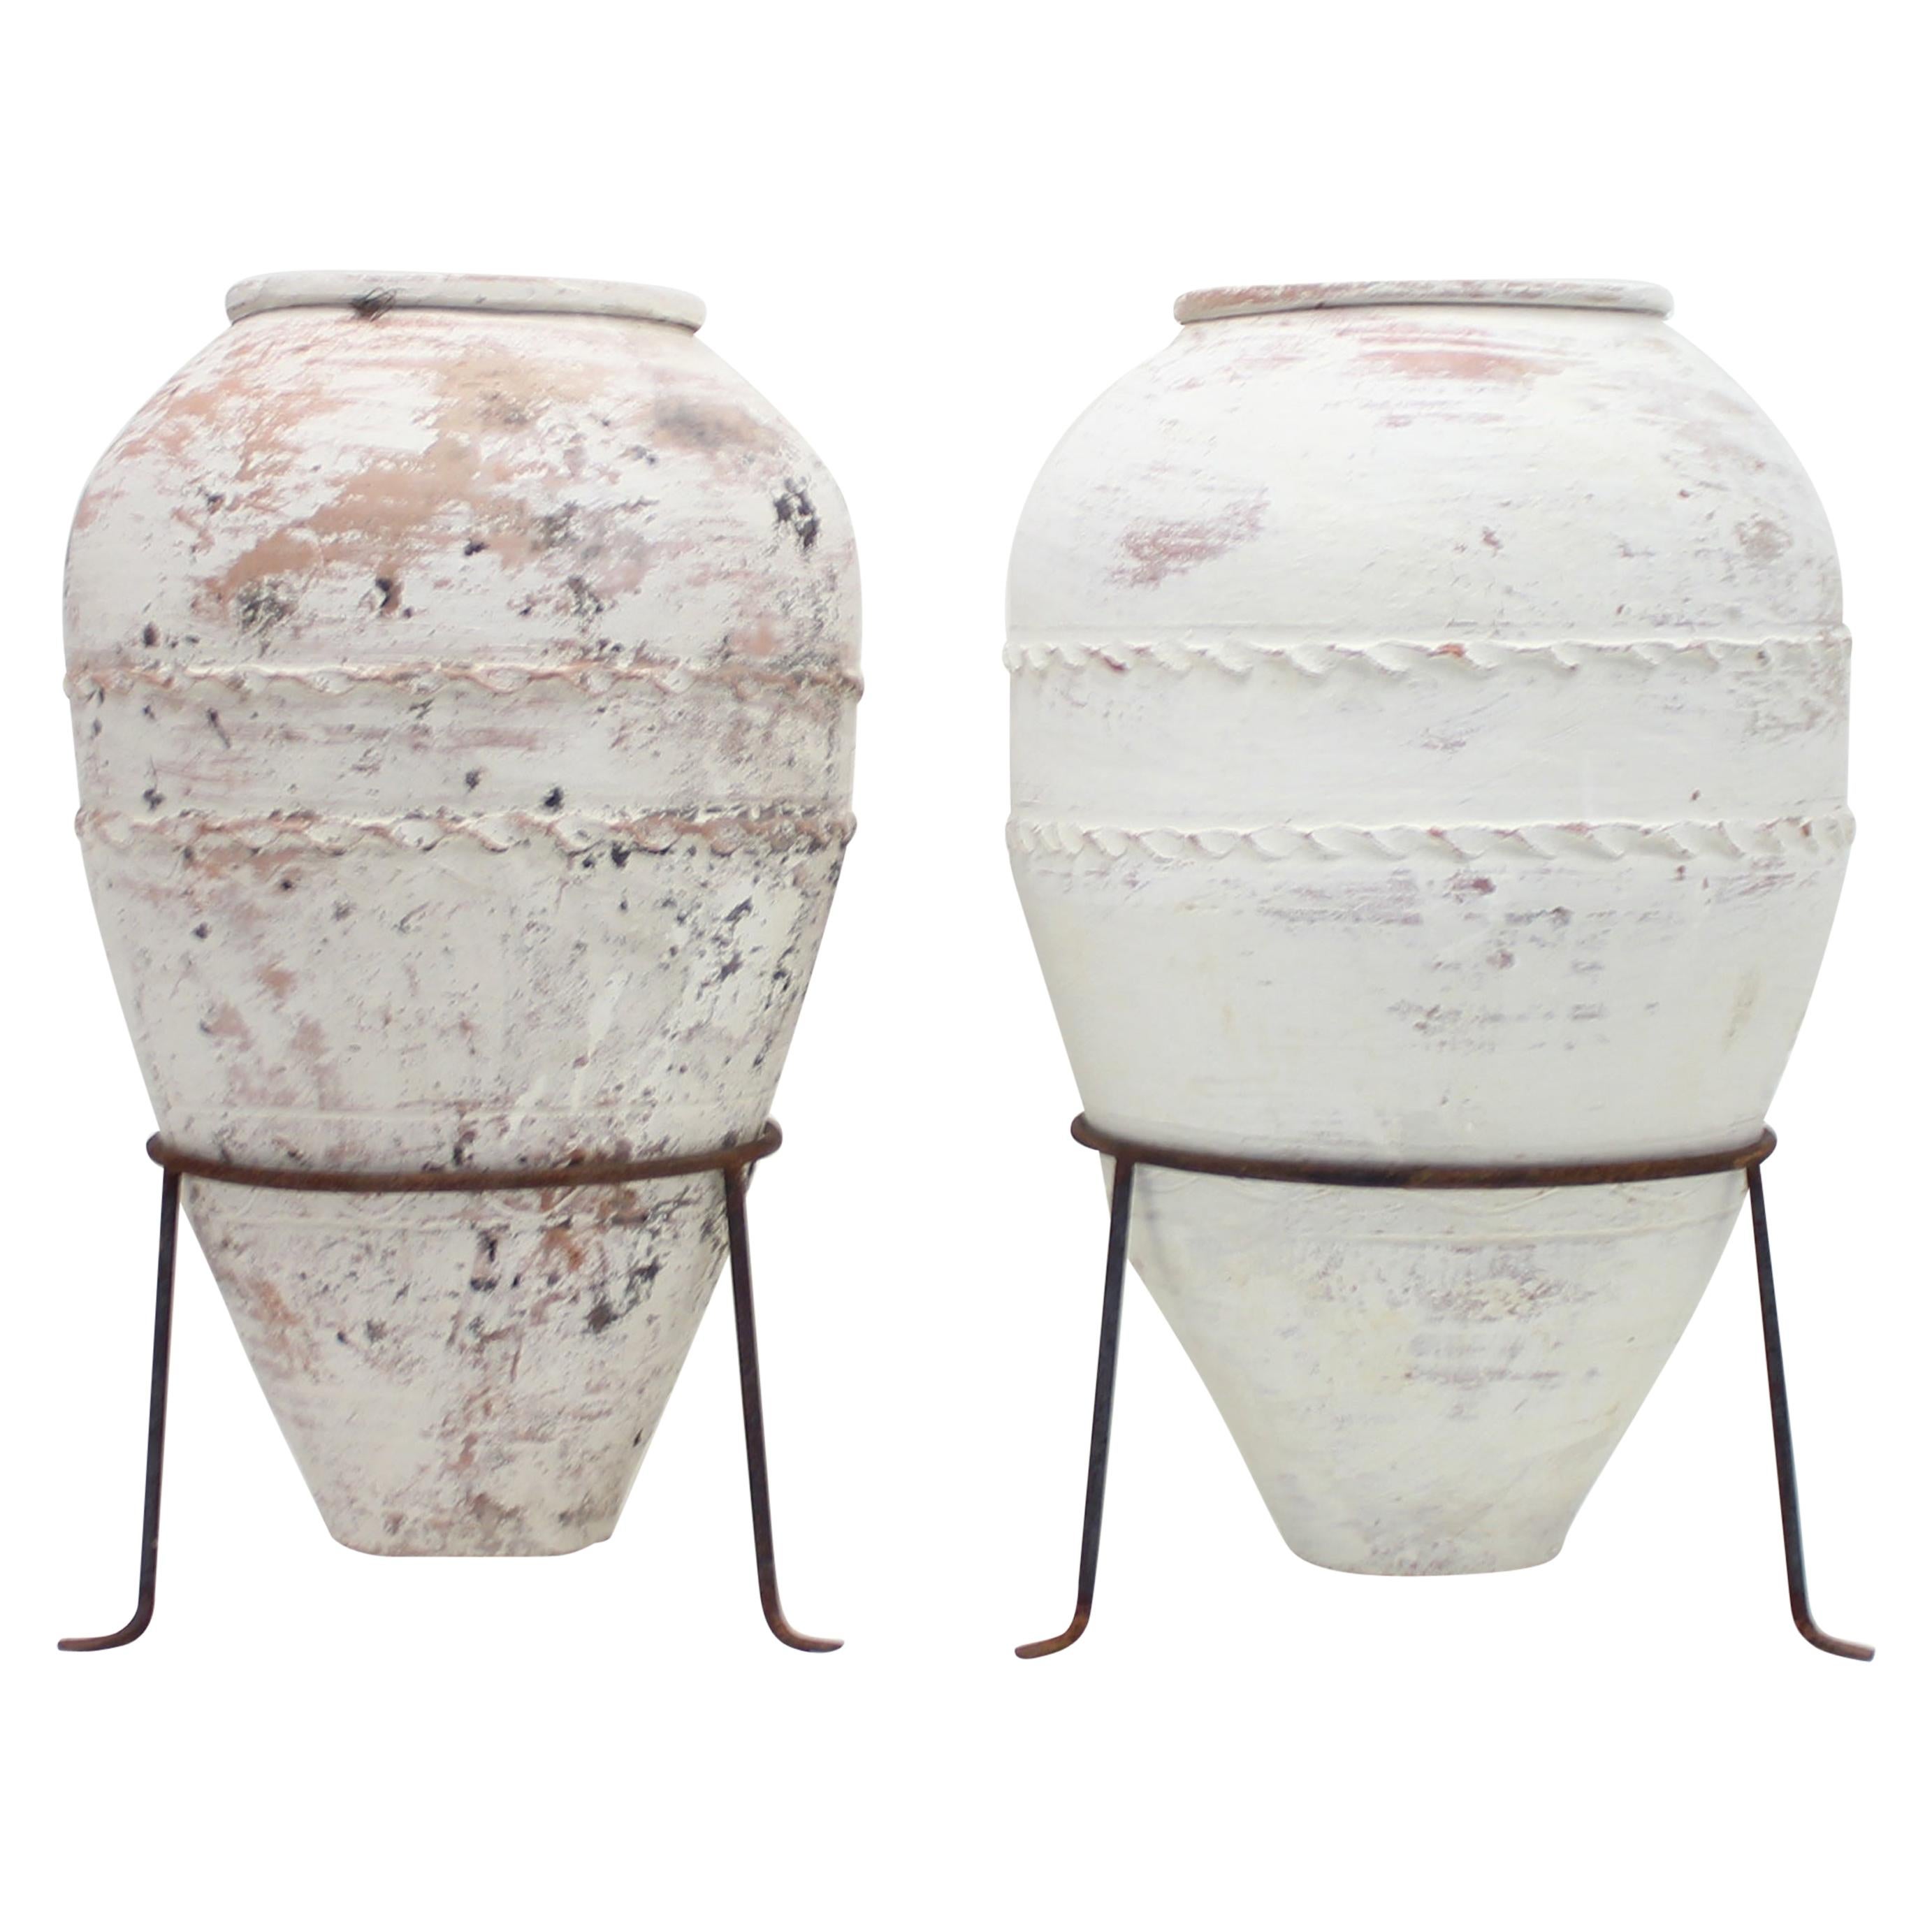 Large pair of early 20th Century Mediterranean Olive Jar, circa 1930s